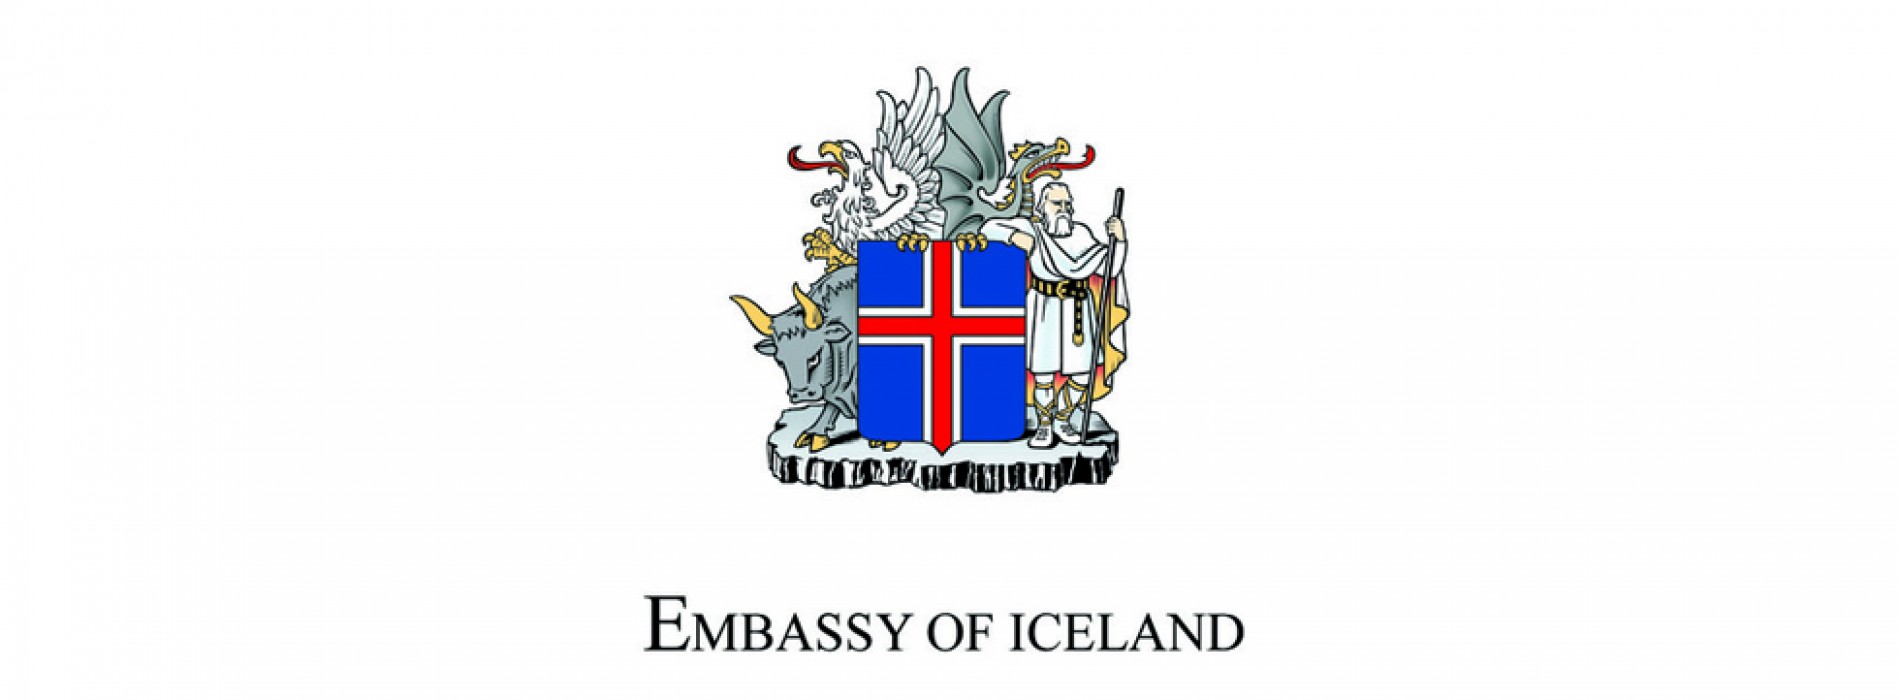 Embassy of Iceland hosts film tourism conference in Chennai & Hyderabad